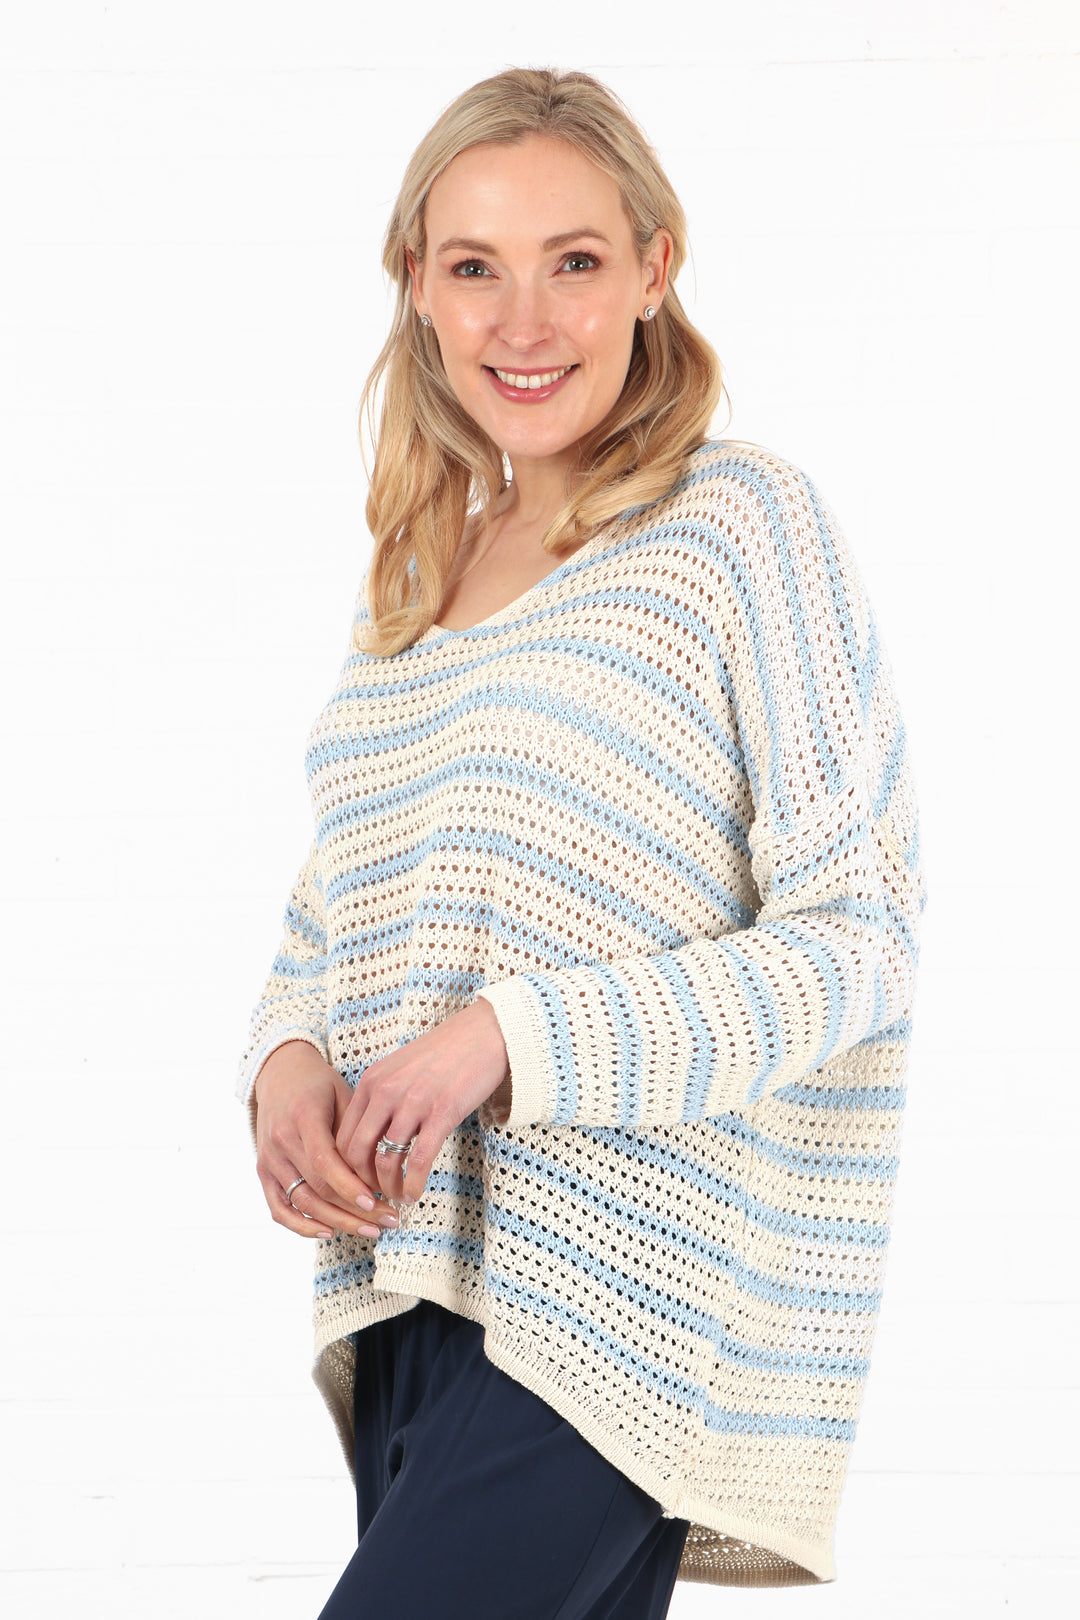 model wearing a lightweight open summer knit cotton jumper with an all over blue and cream stripe pattern